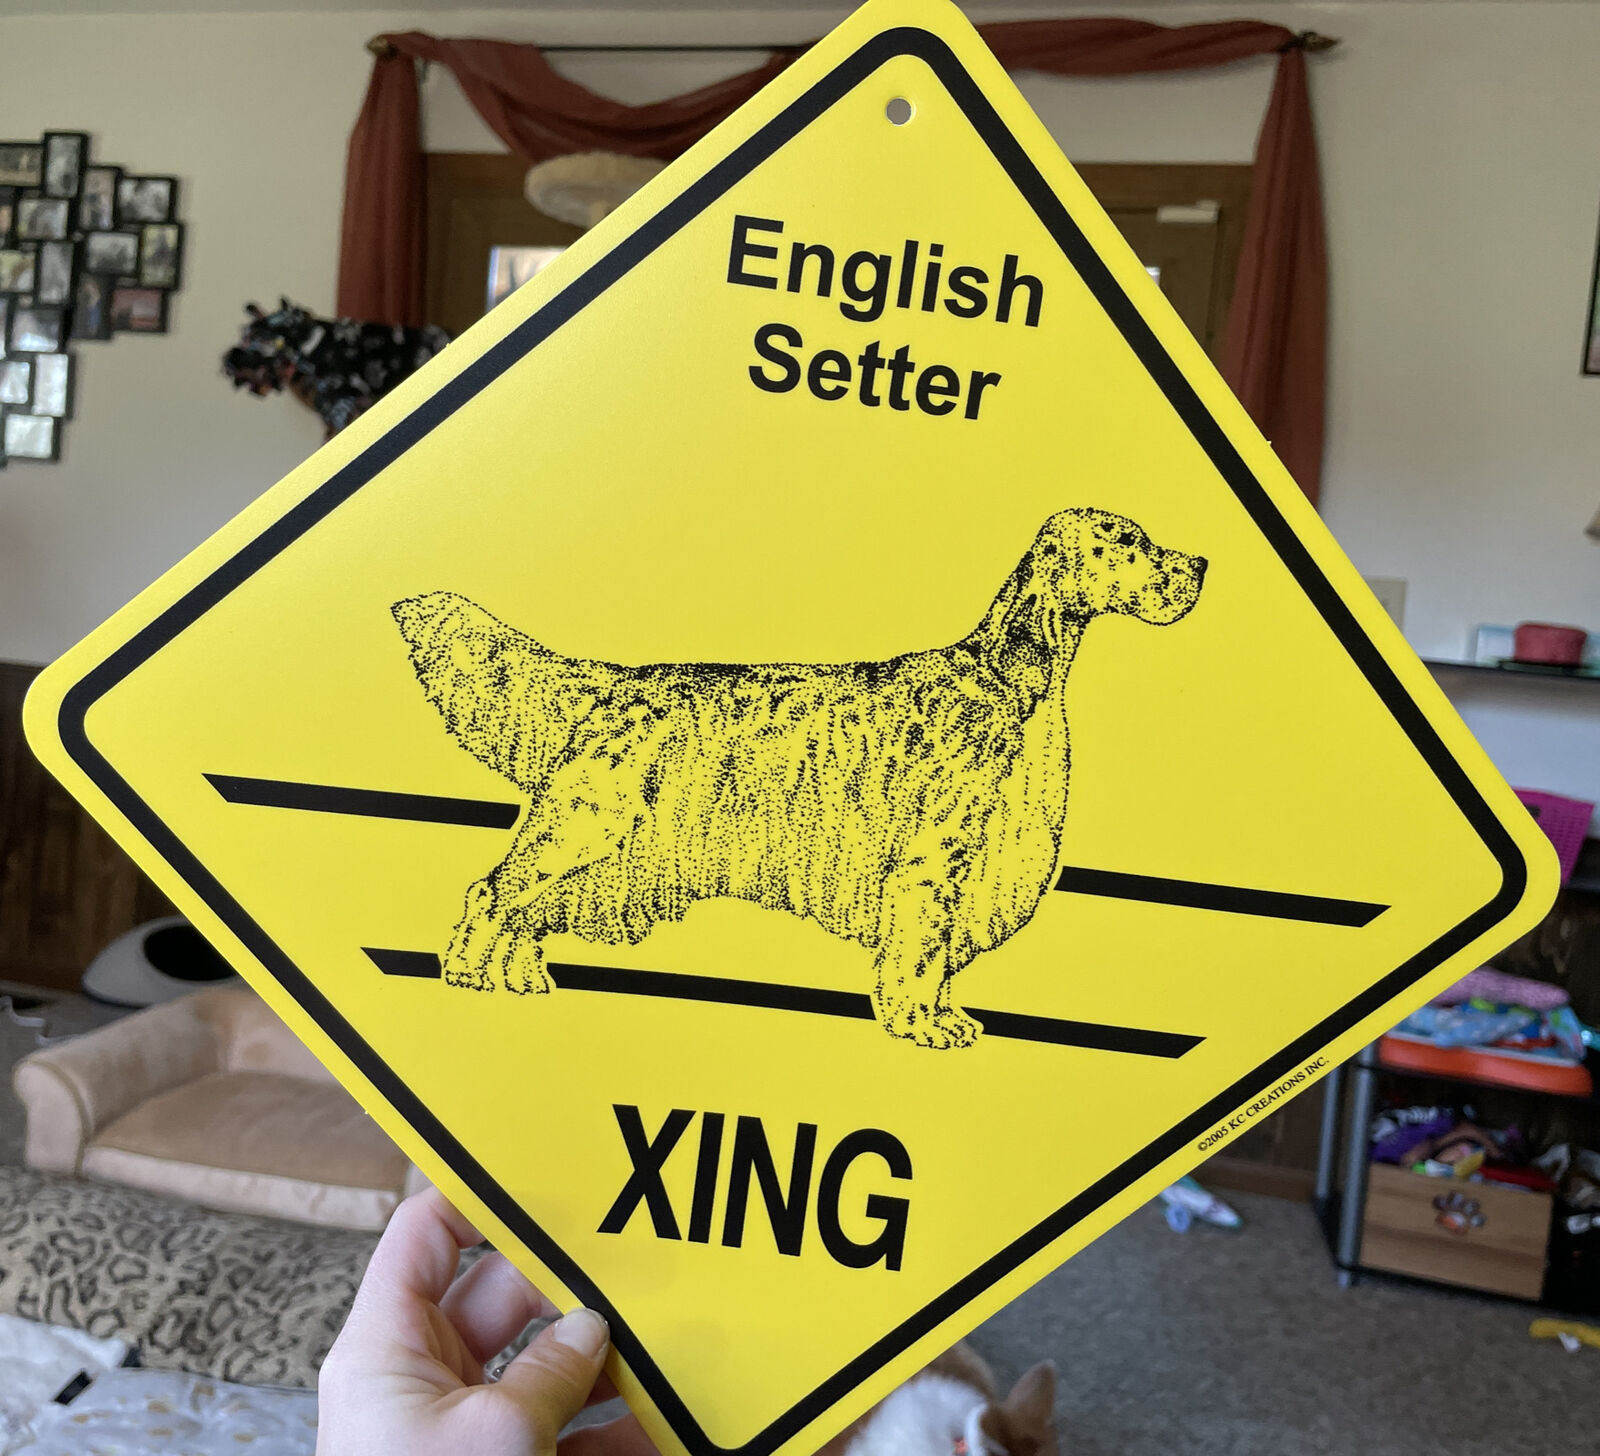 New!! English Setter Dog Crossing Xing Sign, Kc Creations Great Gift!